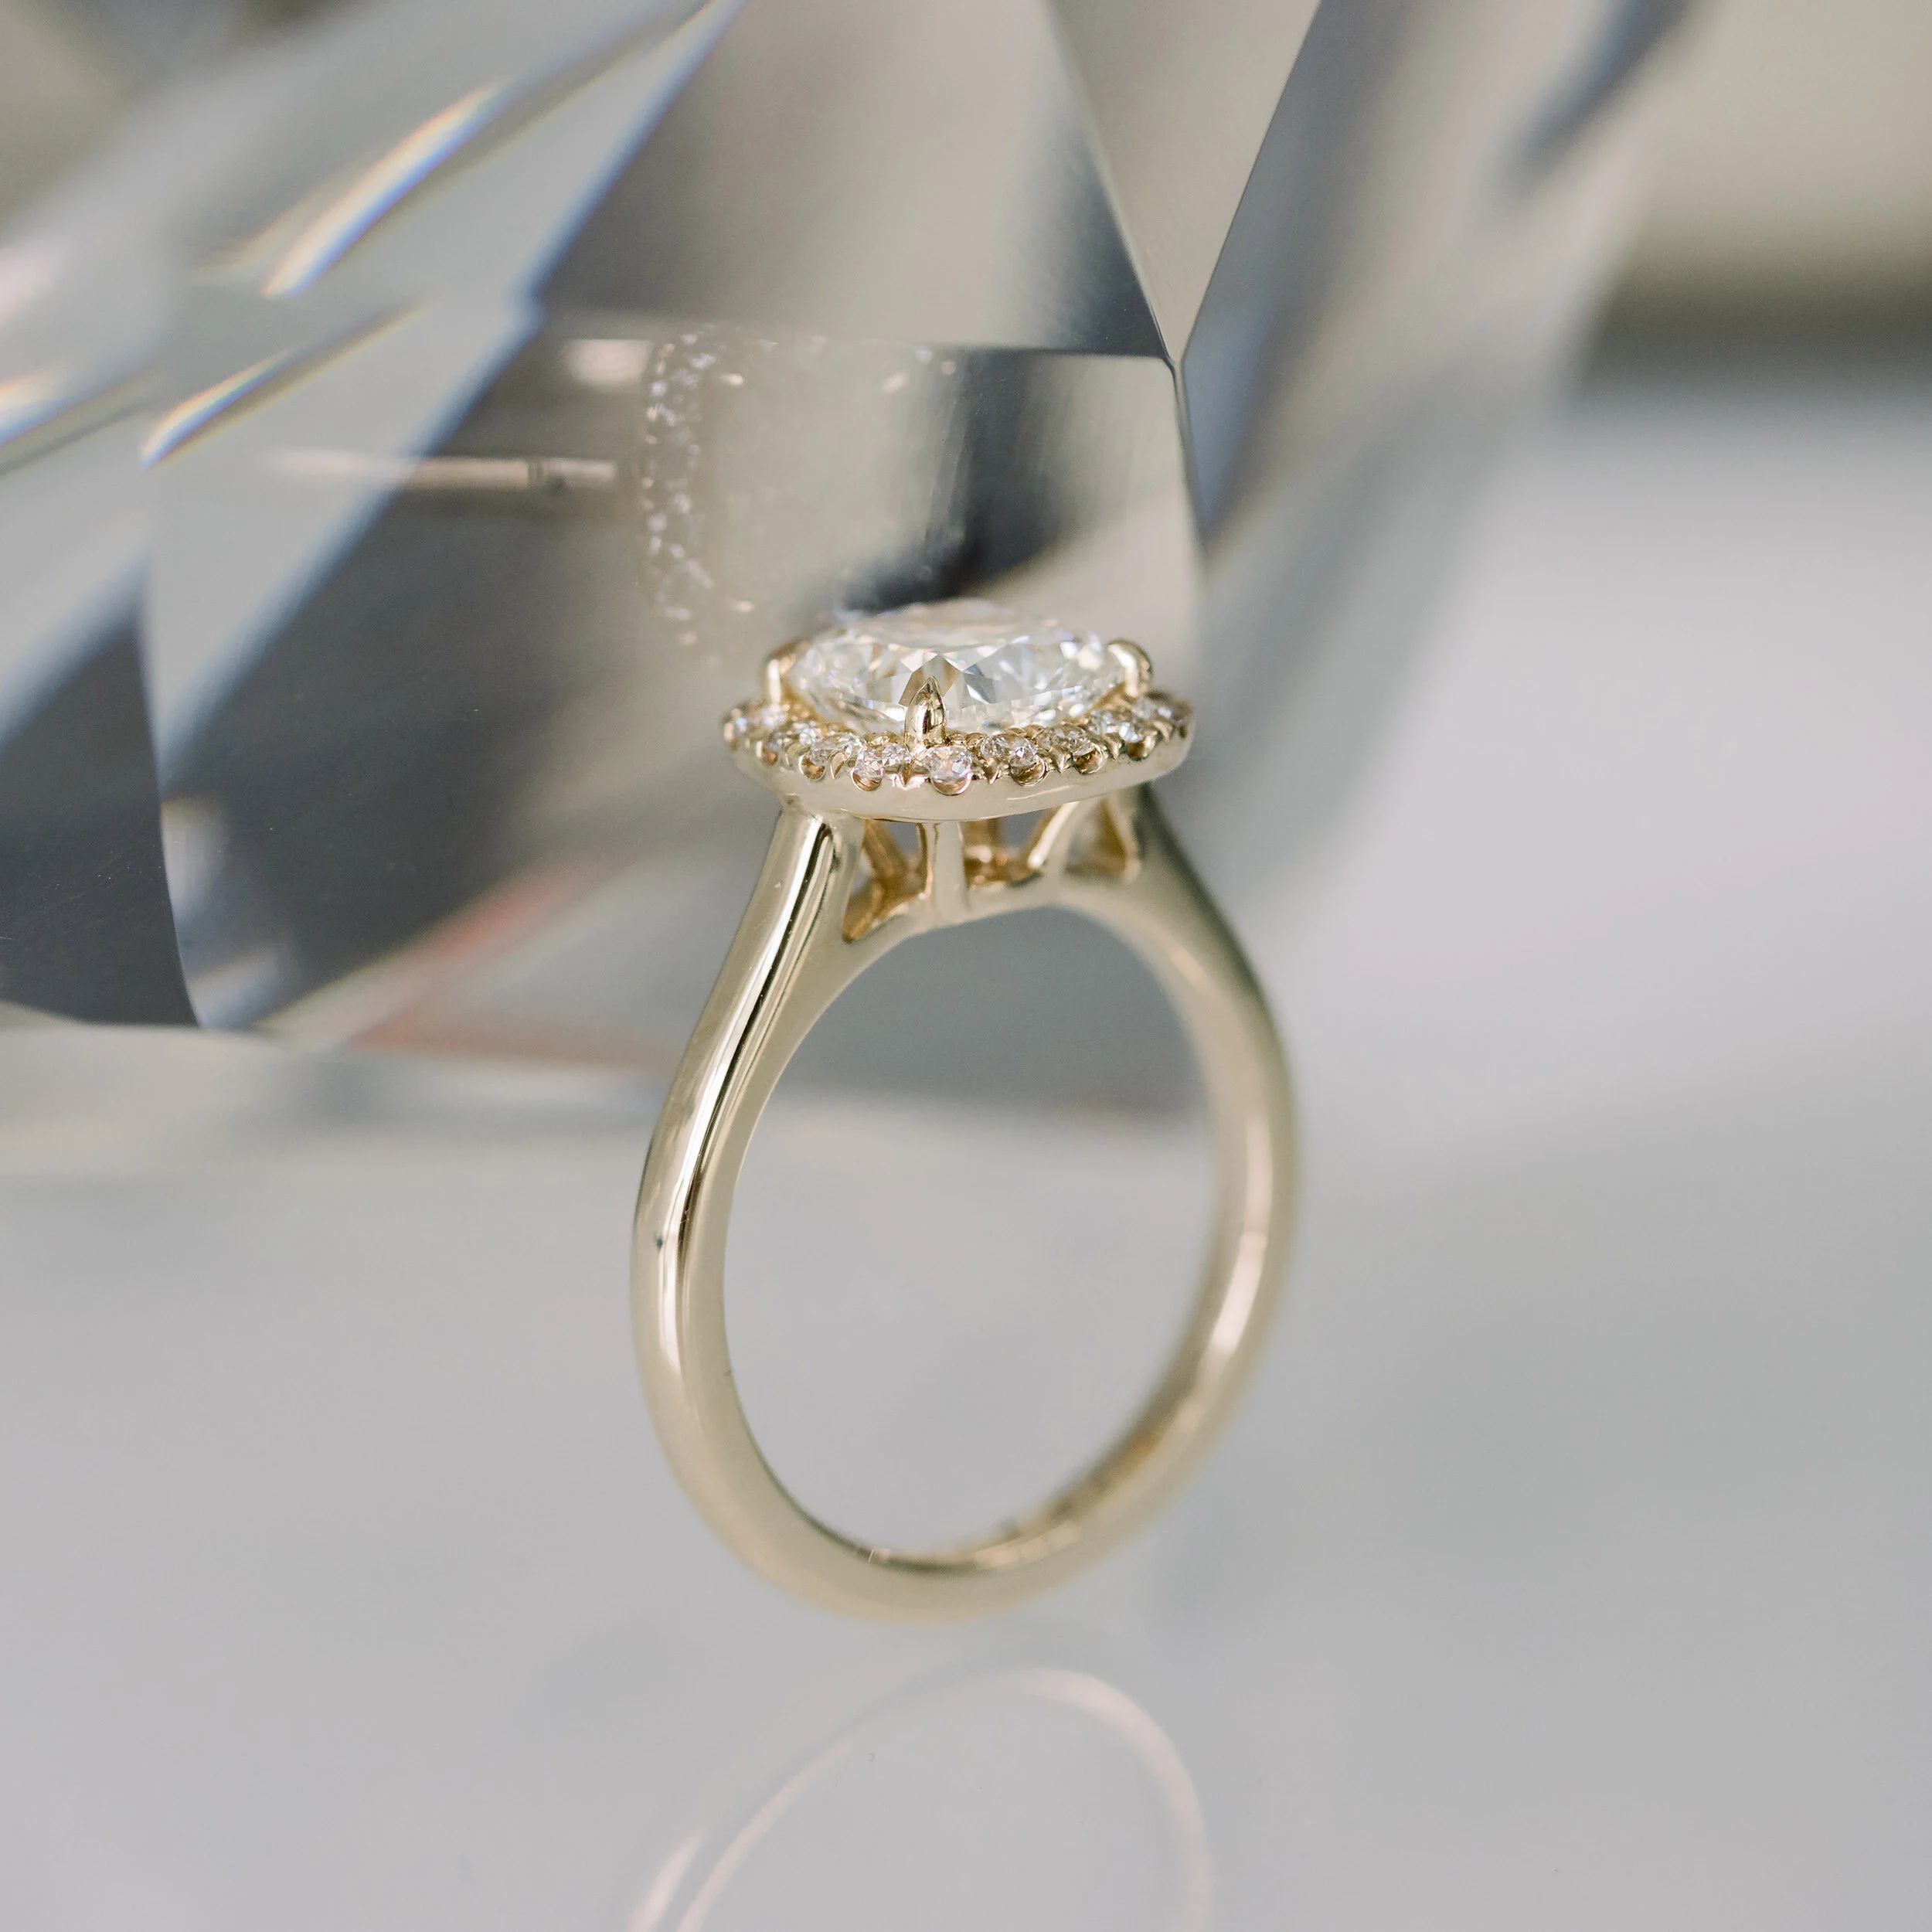 Diamond Solitaire Engagement Ring | Exquisite Jewelry for Every Occasion |  FWCJ